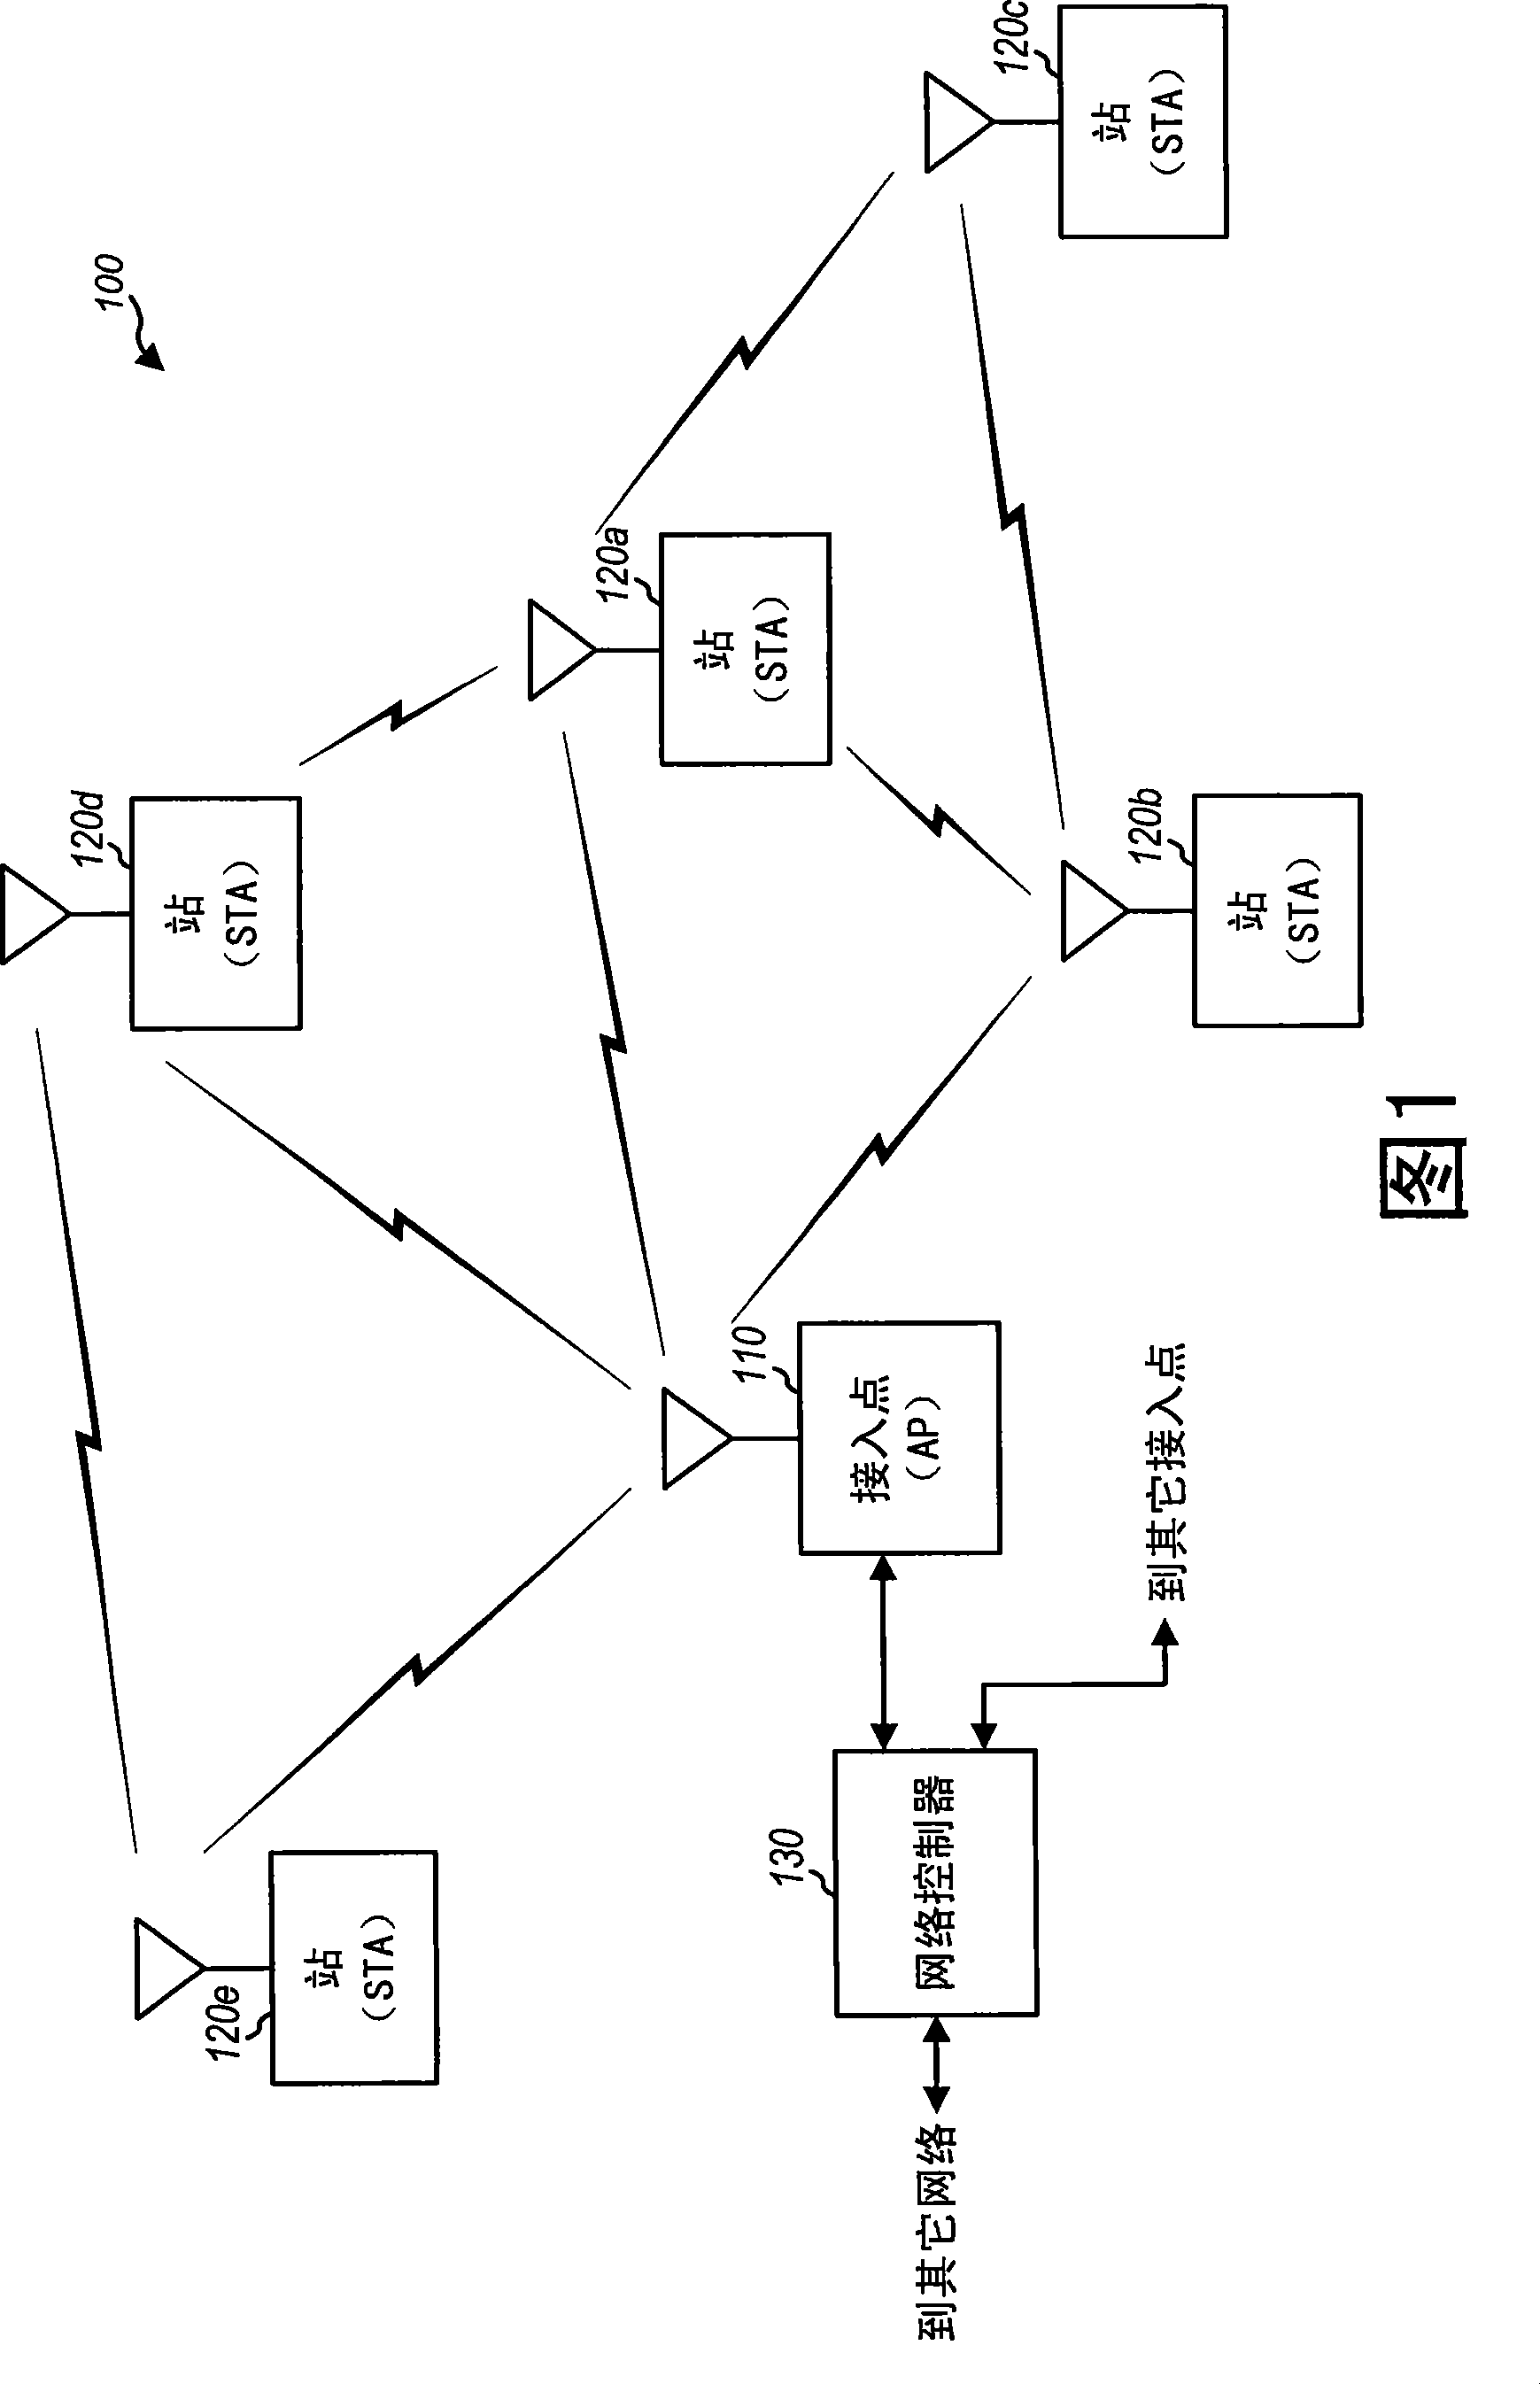 Collision avoidance for traffic in a wireless network